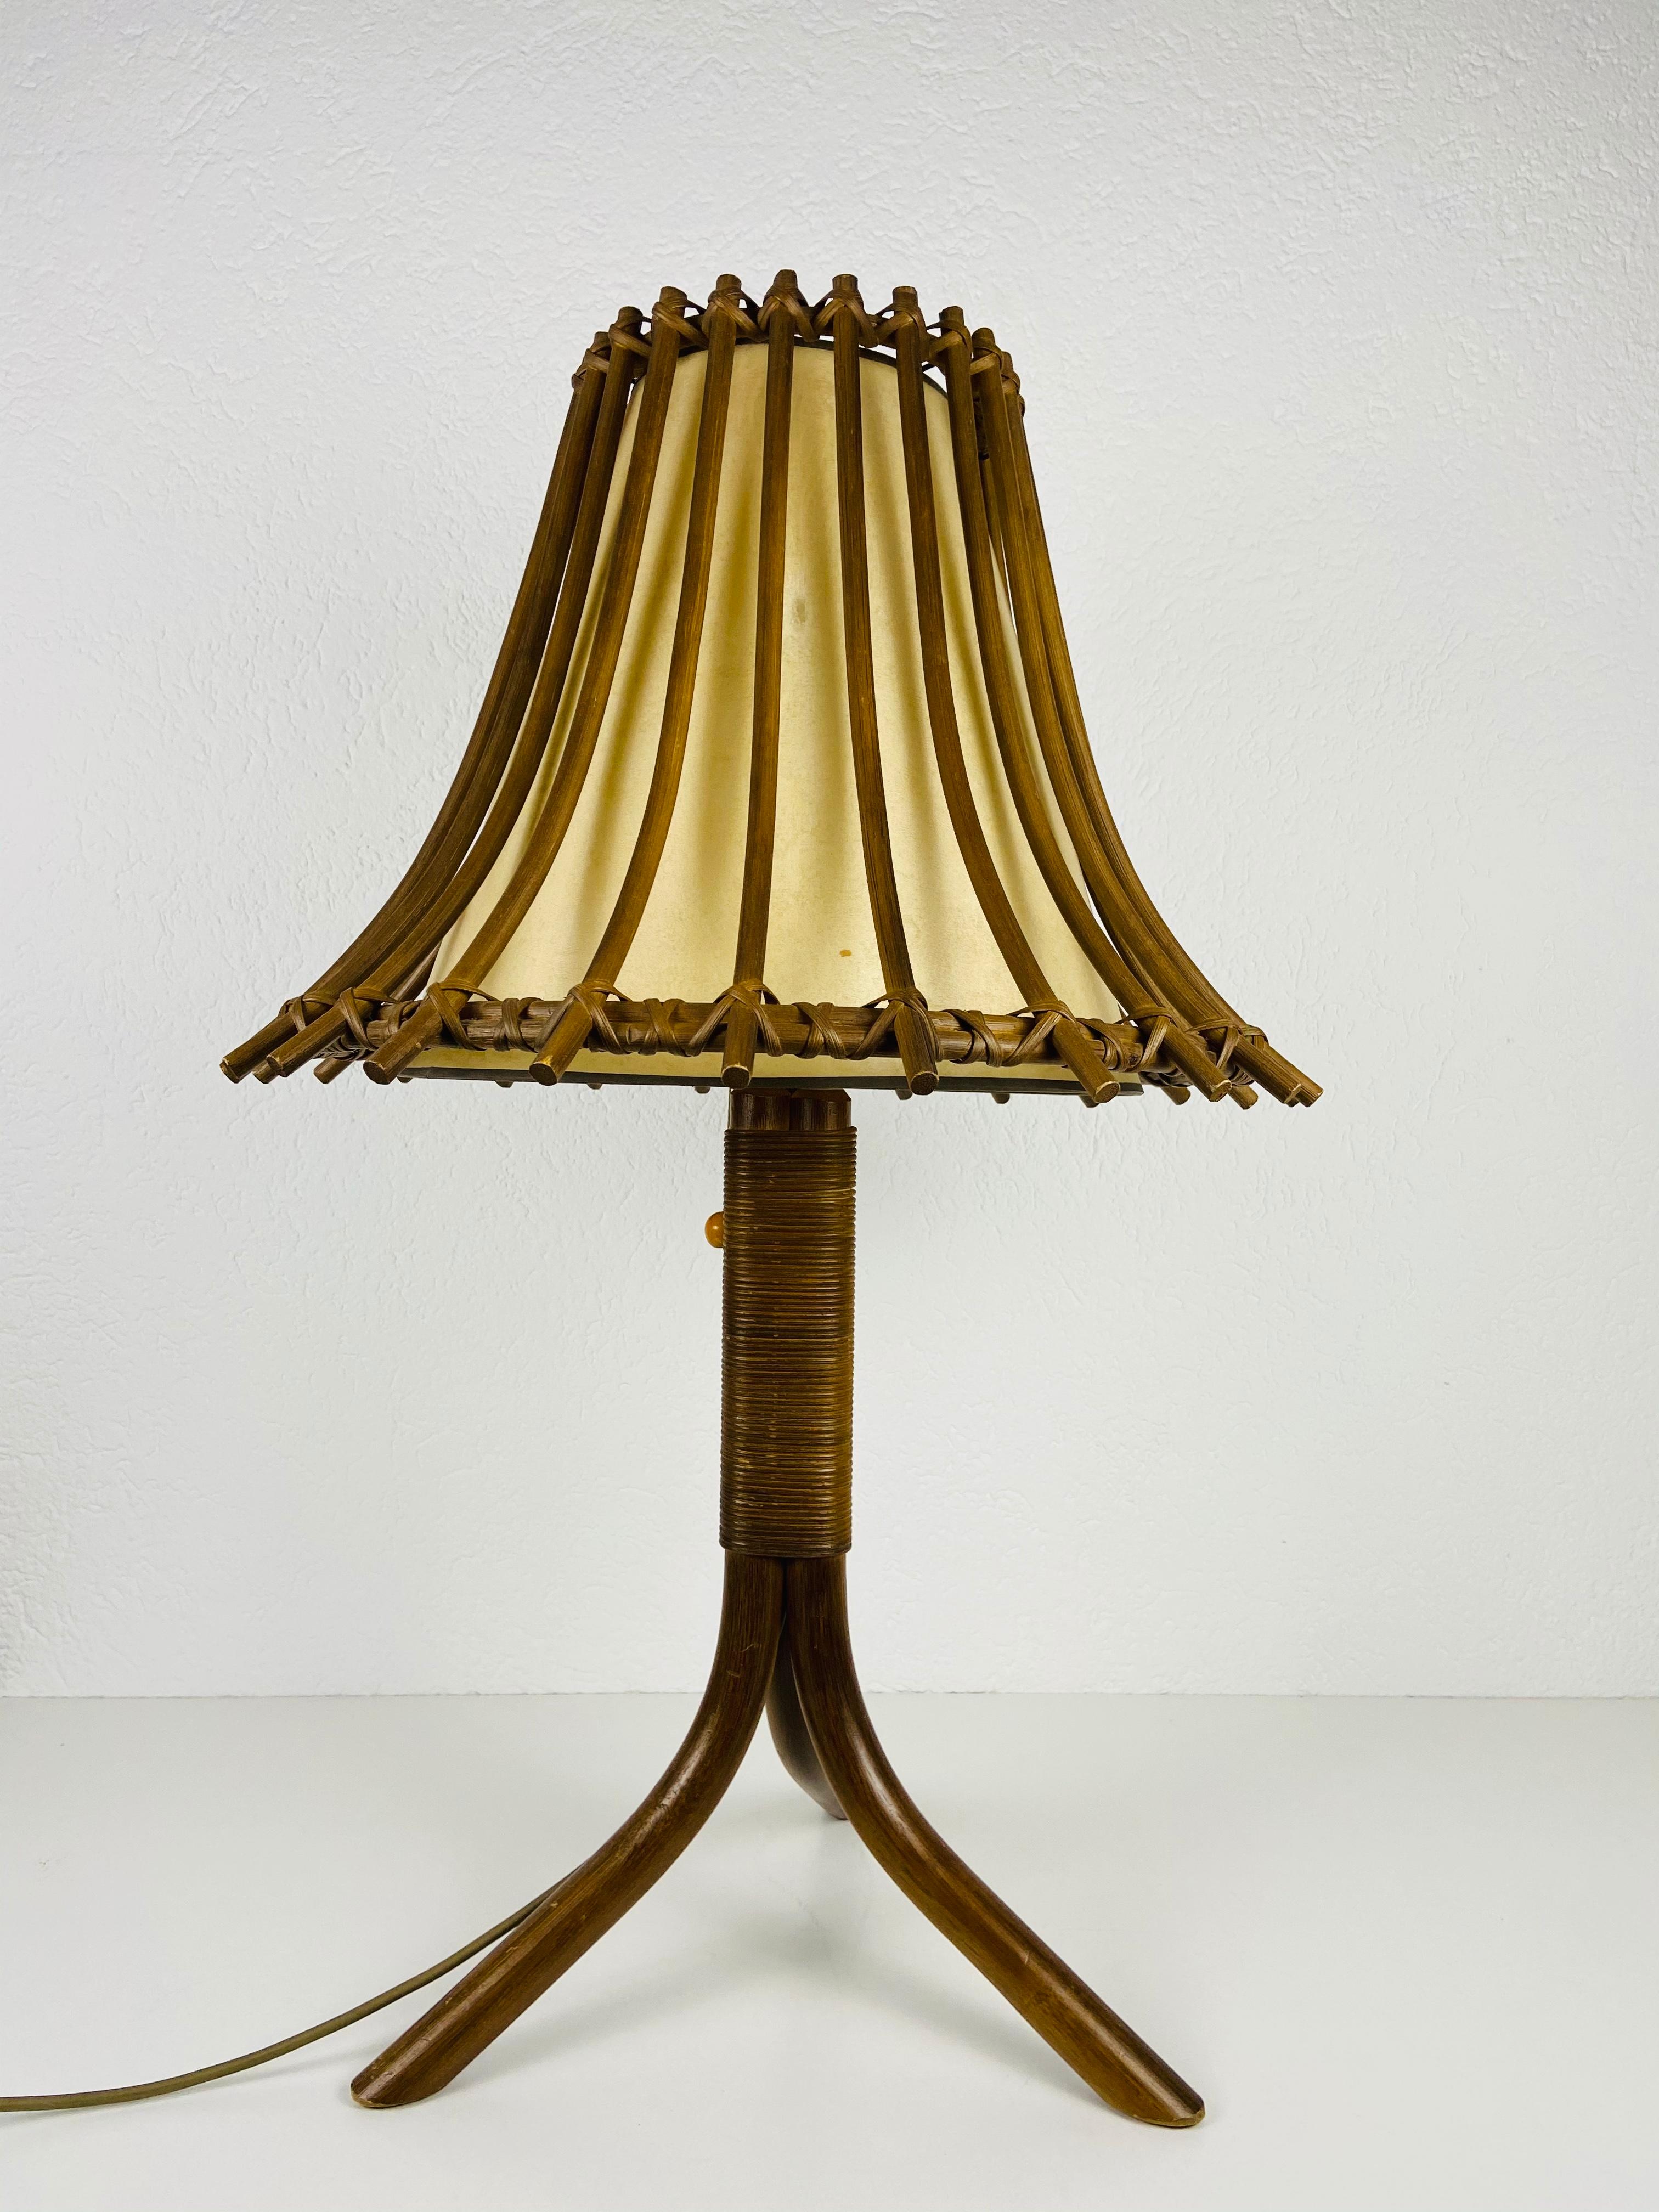 Midcentury Teak and Rattan Table Lamp, circa 1970 For Sale 6